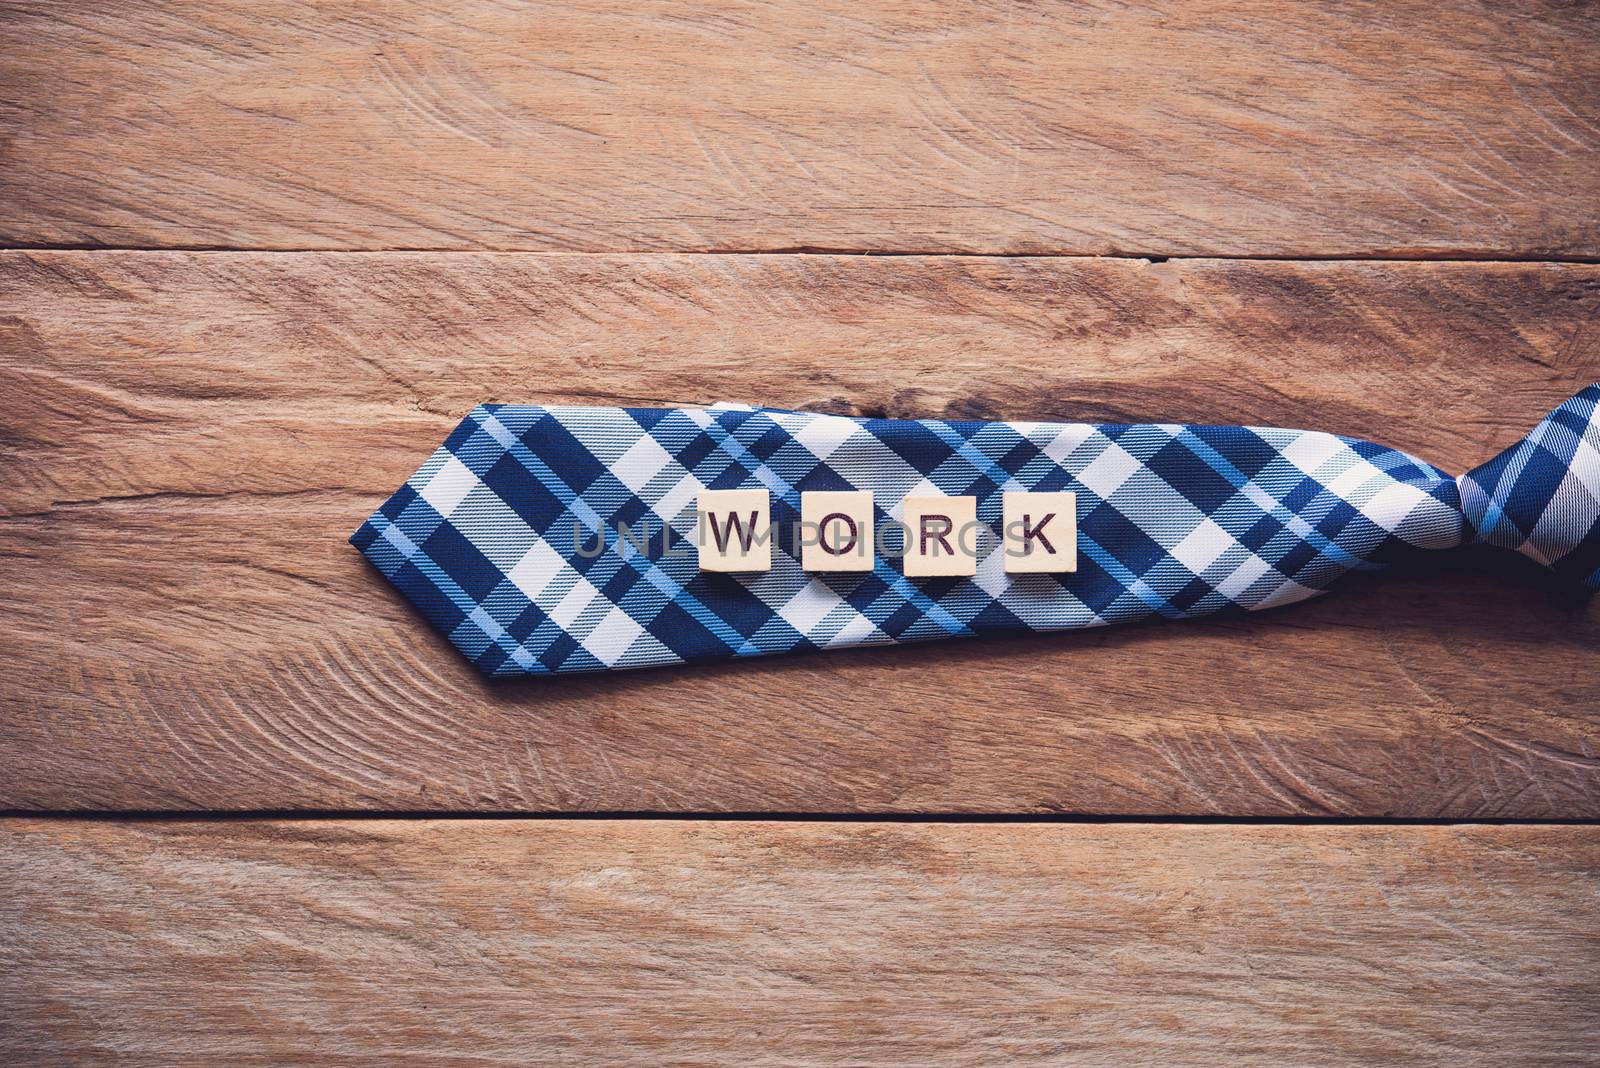 Necktie and the message "work" put on wooden floor - Concept of  by photobyphotoboy